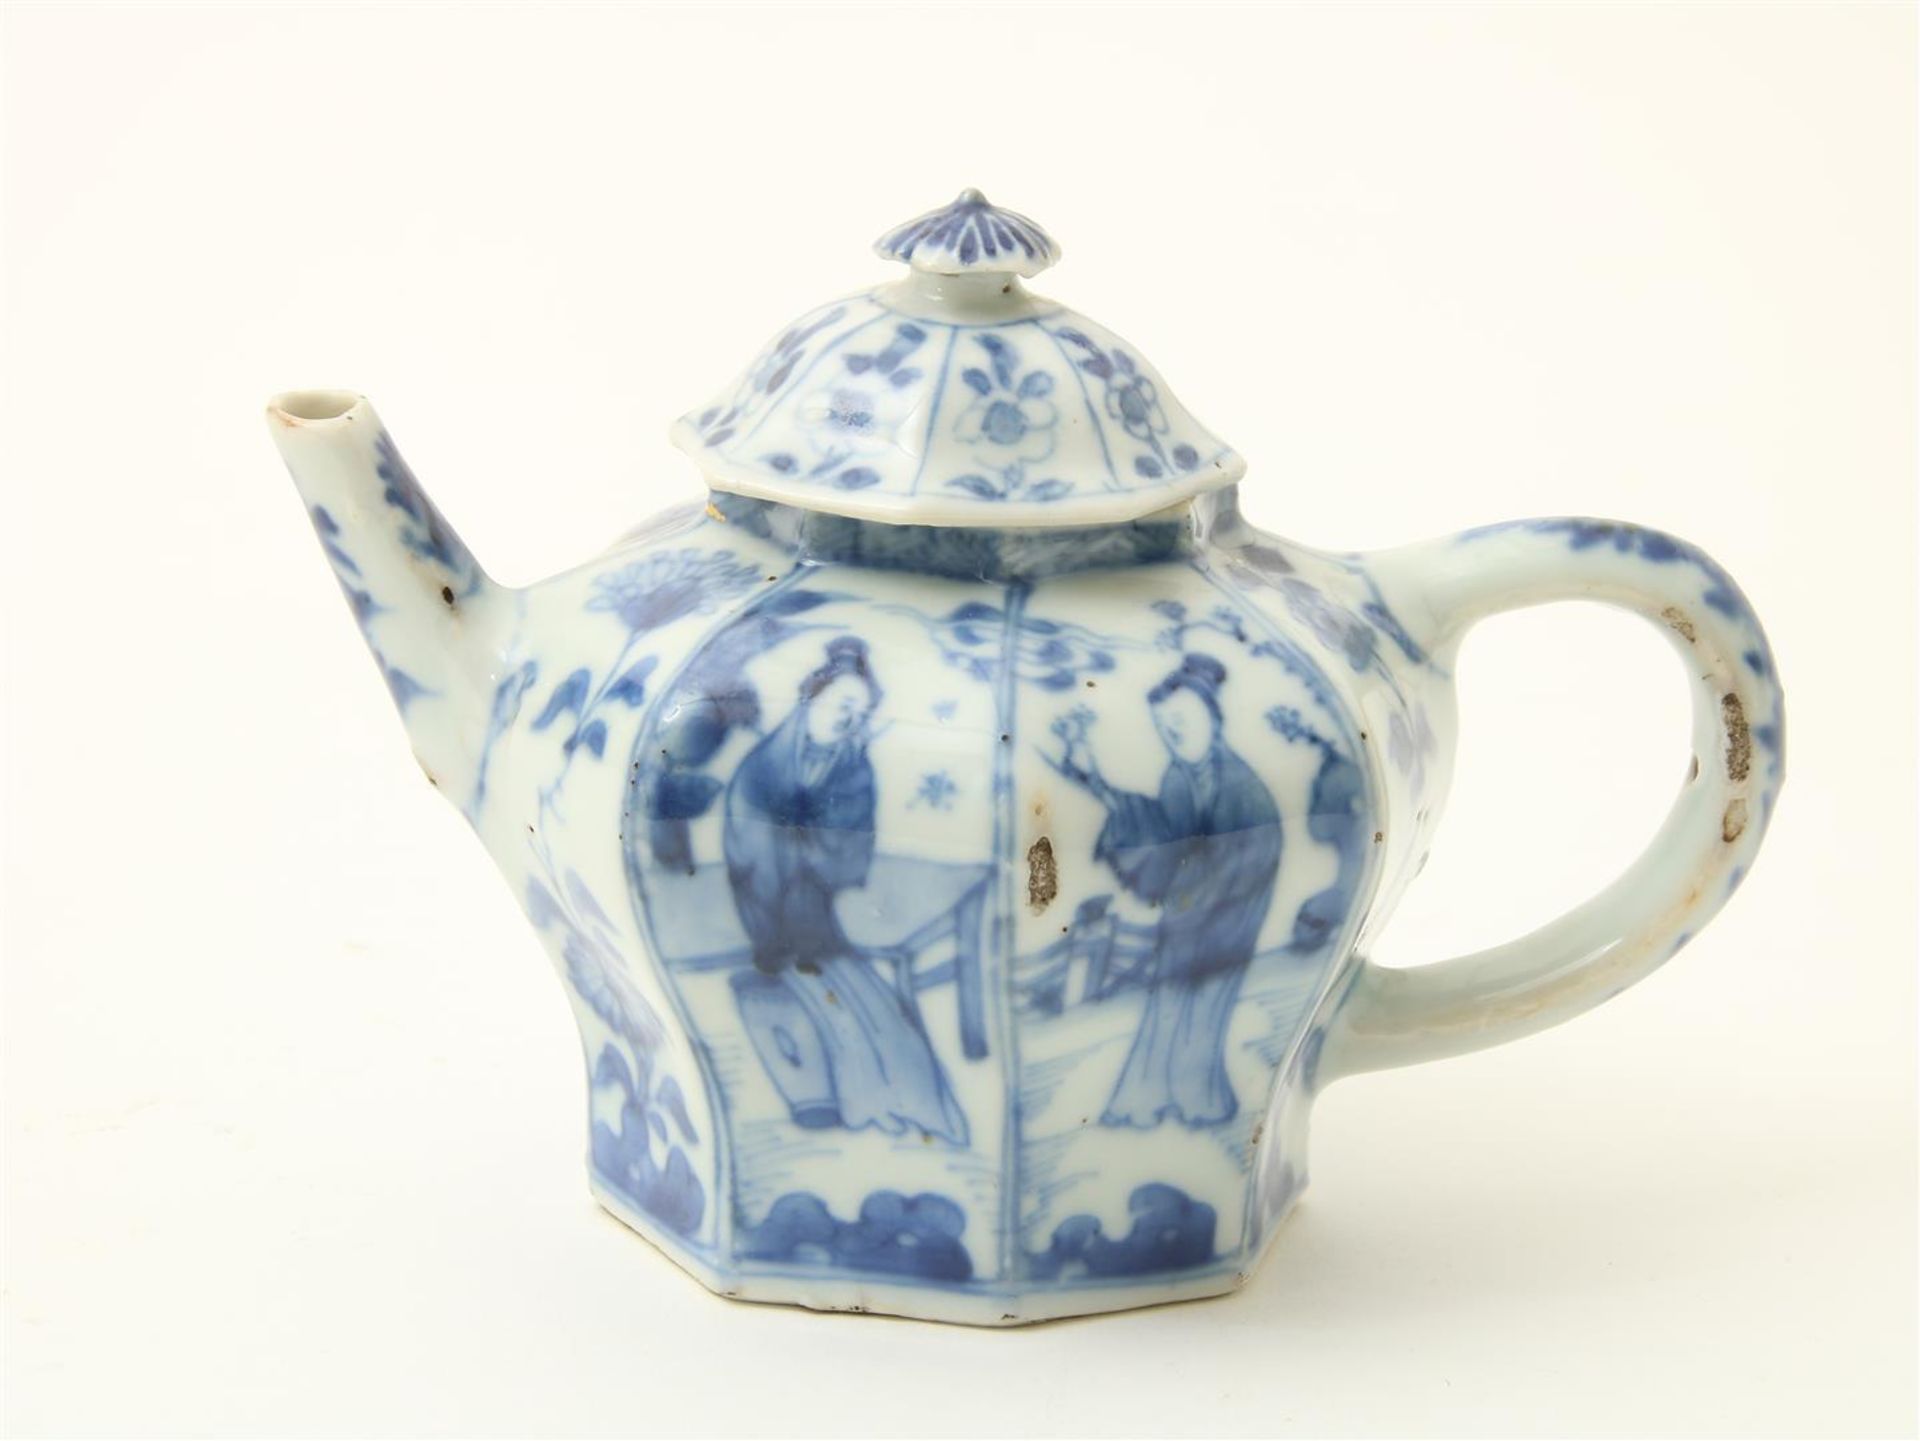 Porcelain lobed Kangxi teapot with long frame and floral decoration, China 18th century, height 10